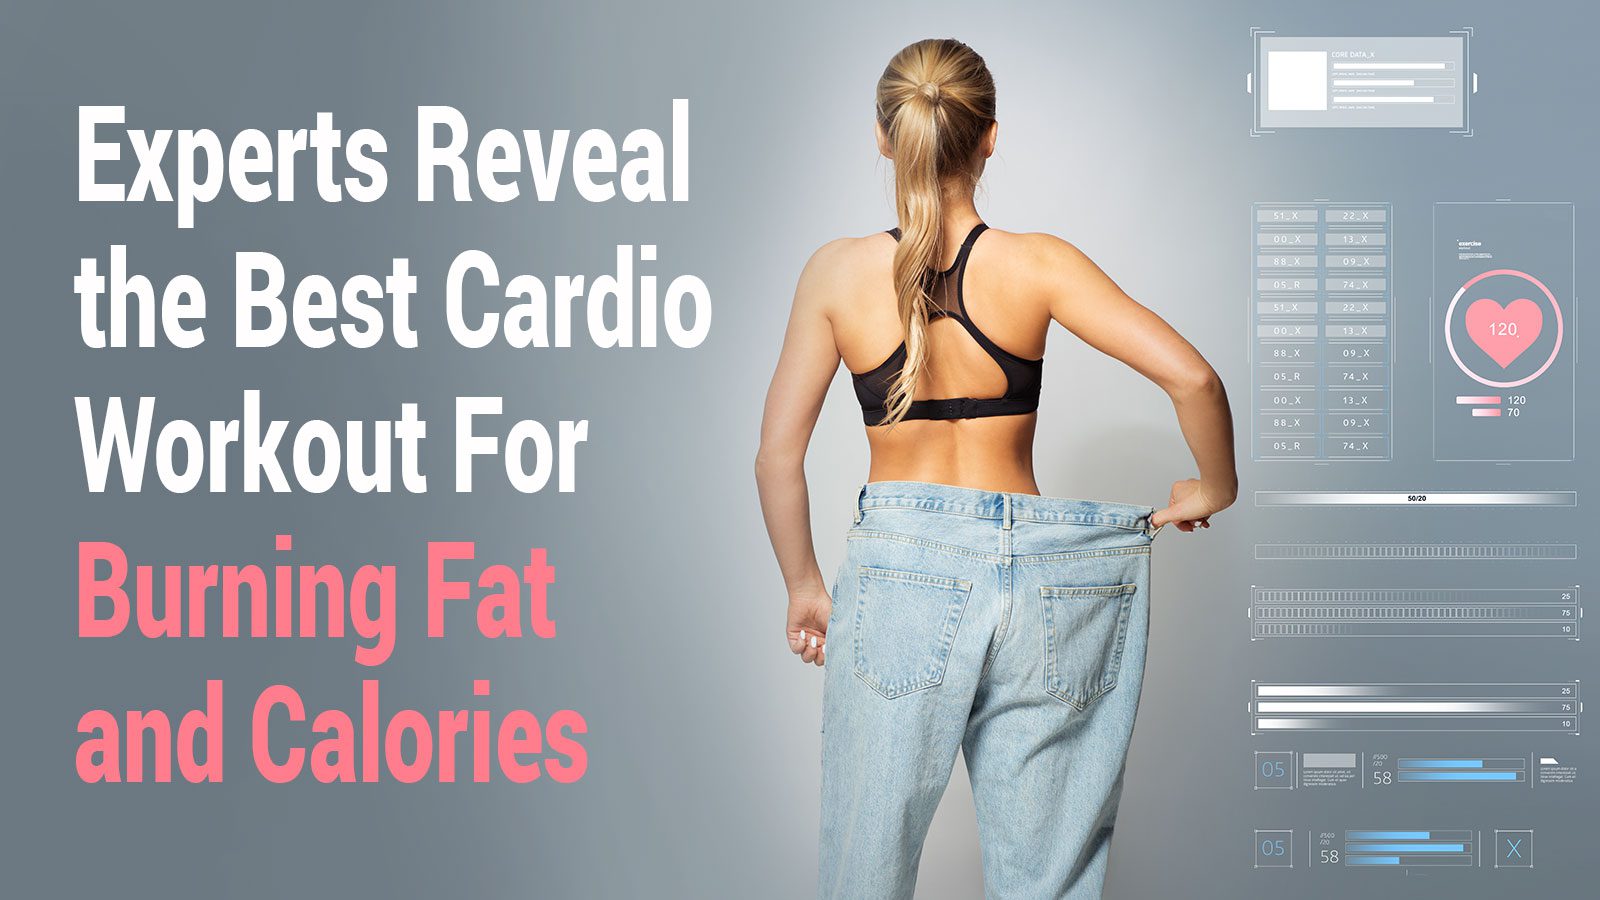 Experts Reveal the Best Cardio Workout For Burning Fat and Calories